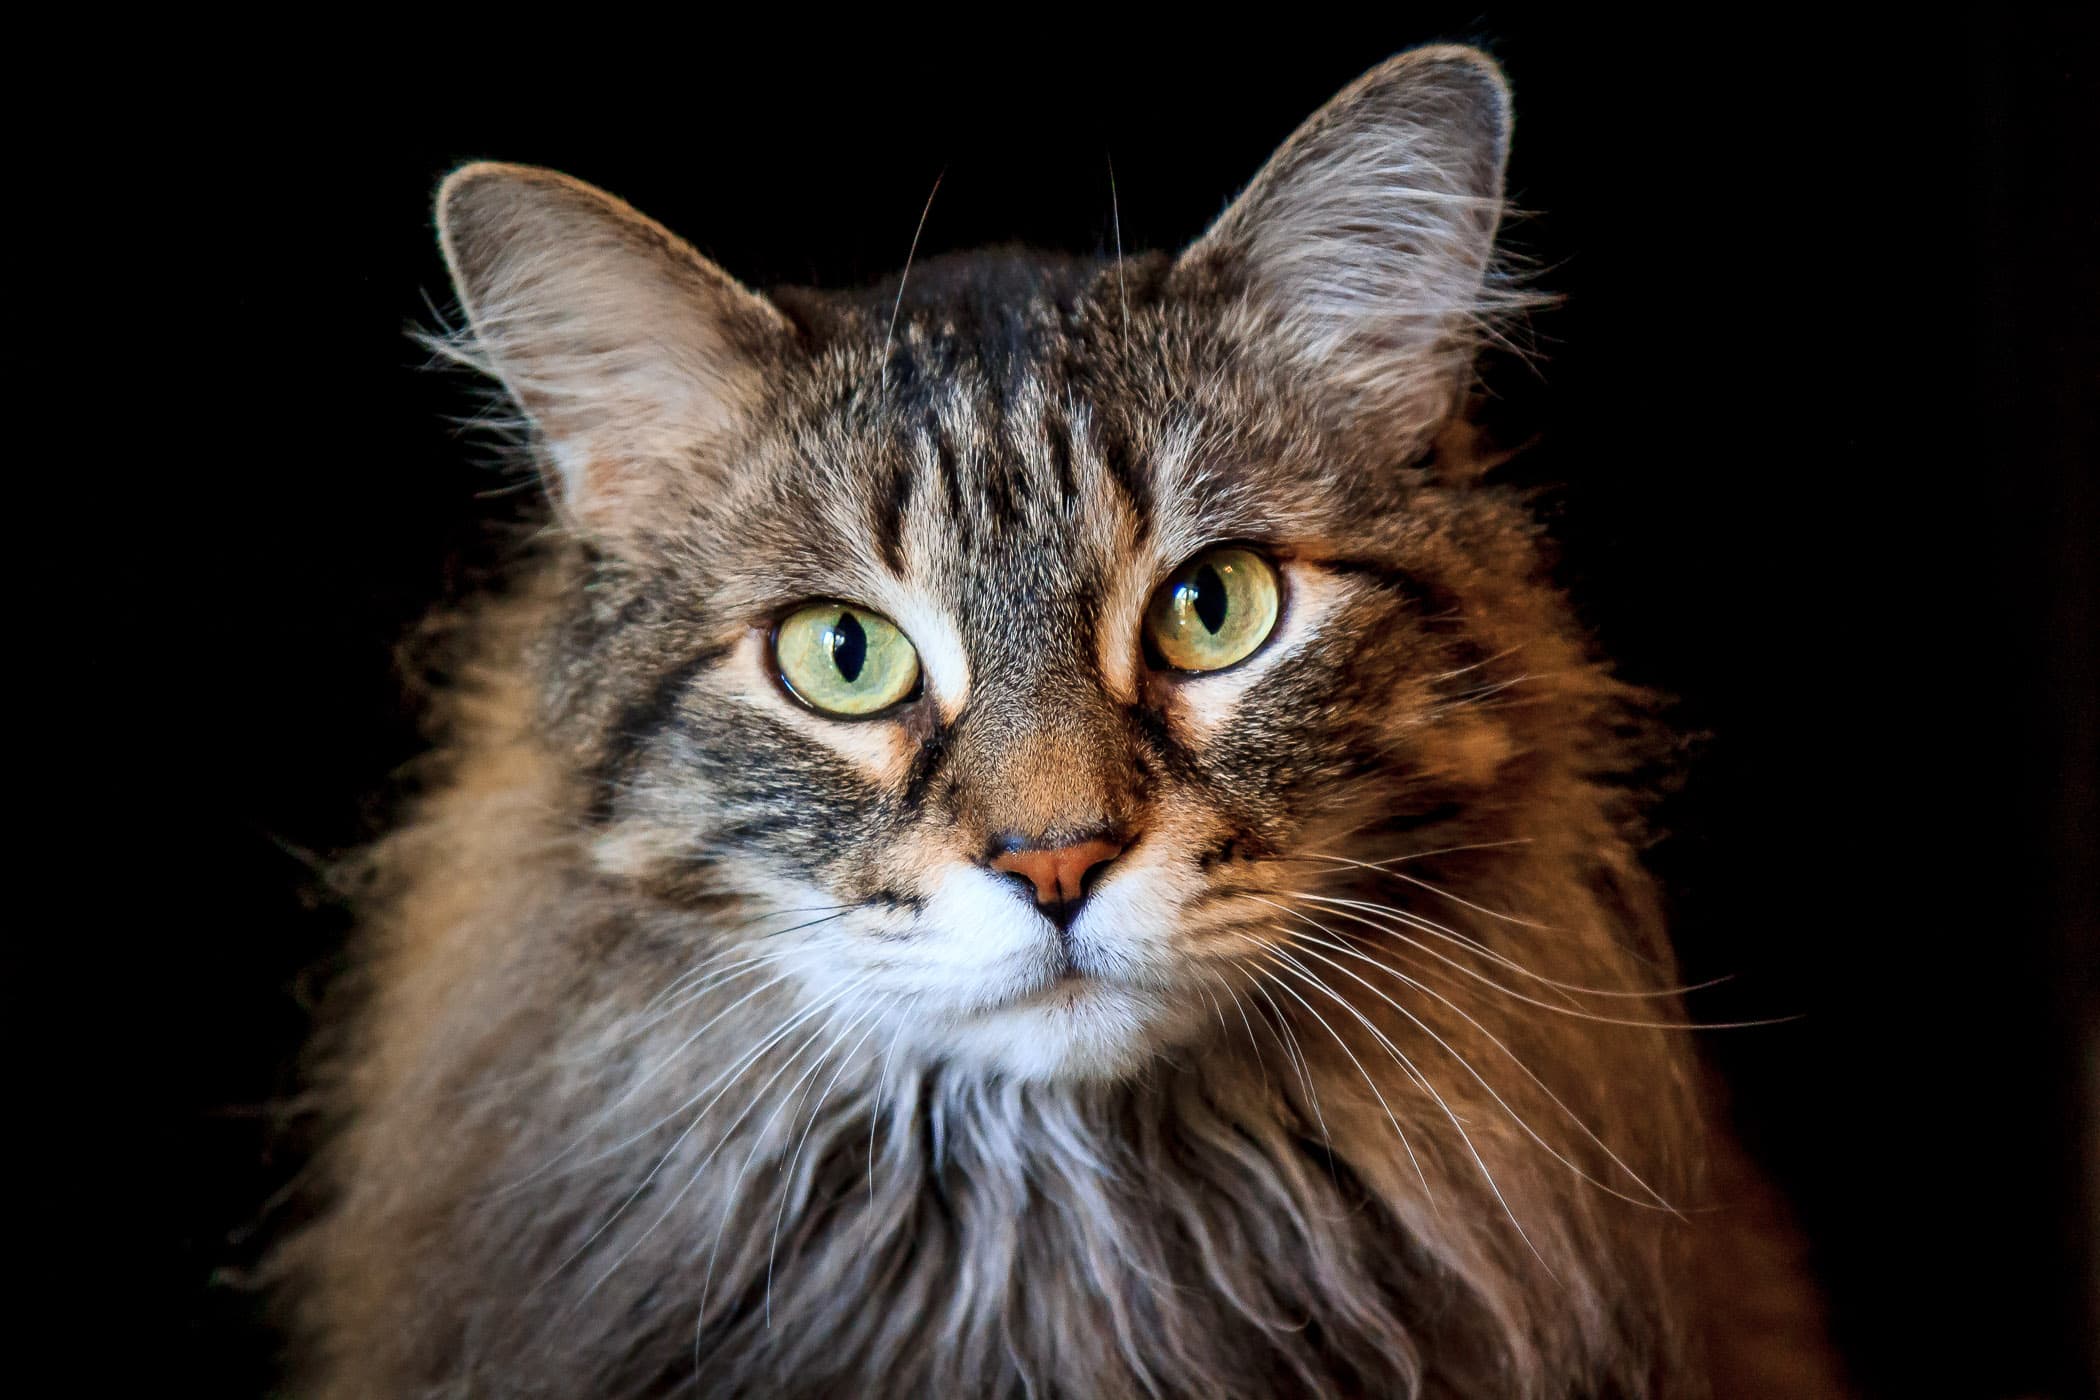 A portrait of one of our Maine Coon cats, Squeaky.